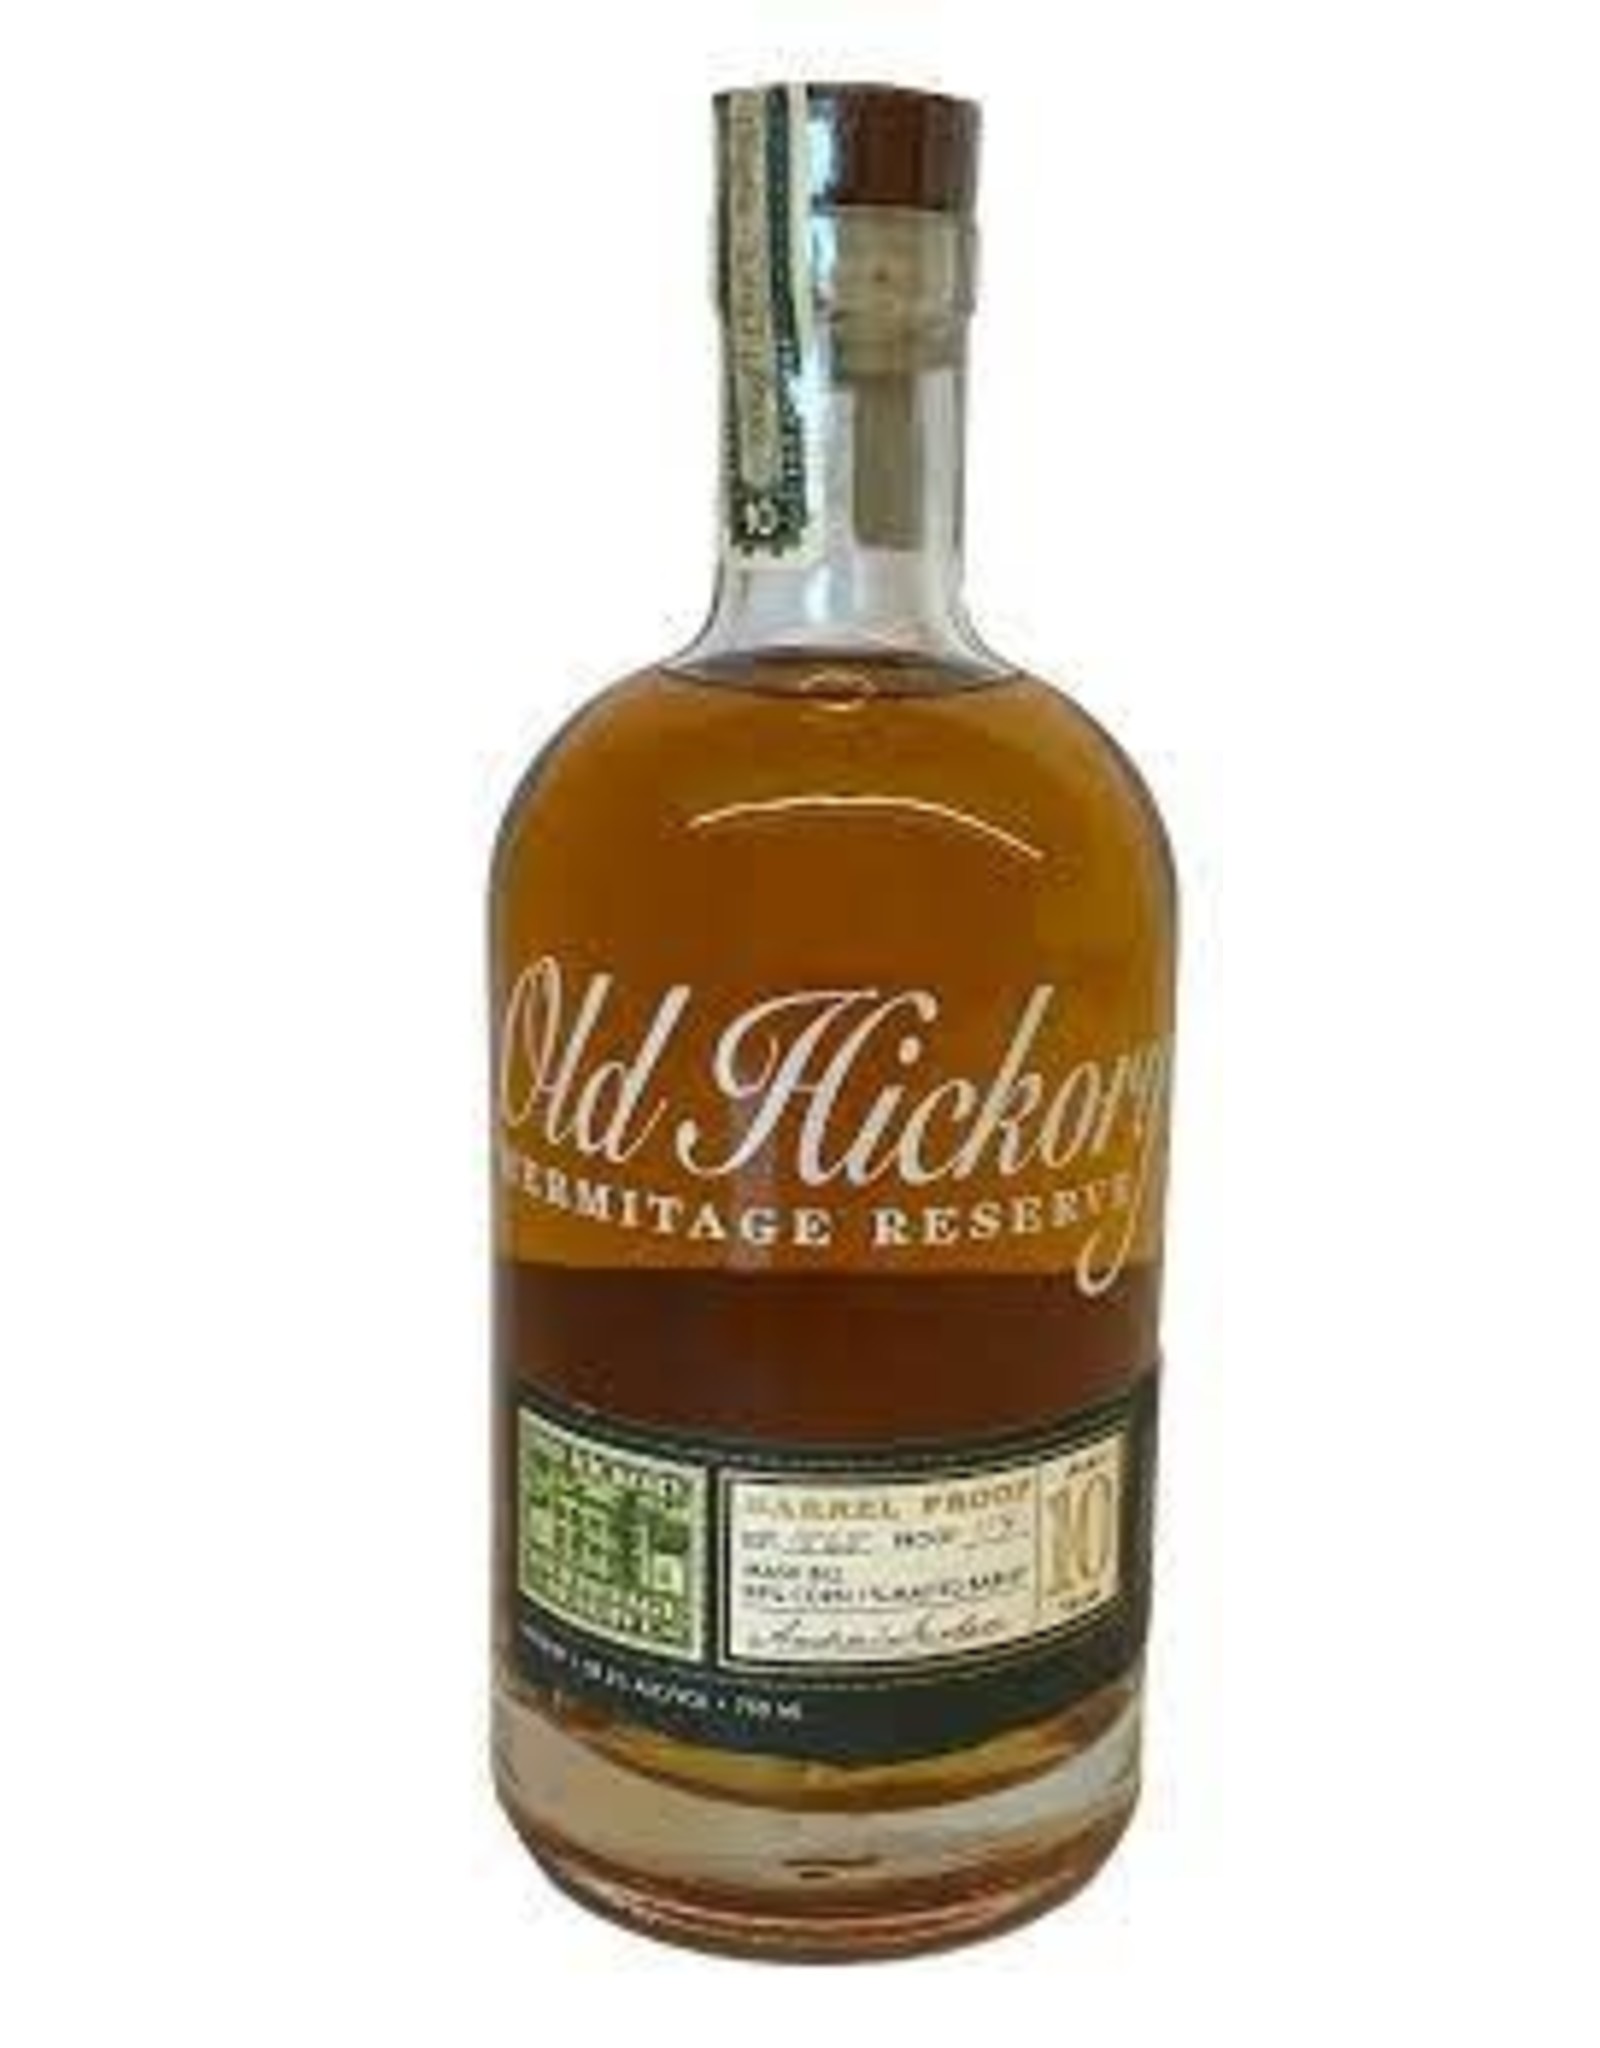 Old Hickory Hermitage Reserve 10 year